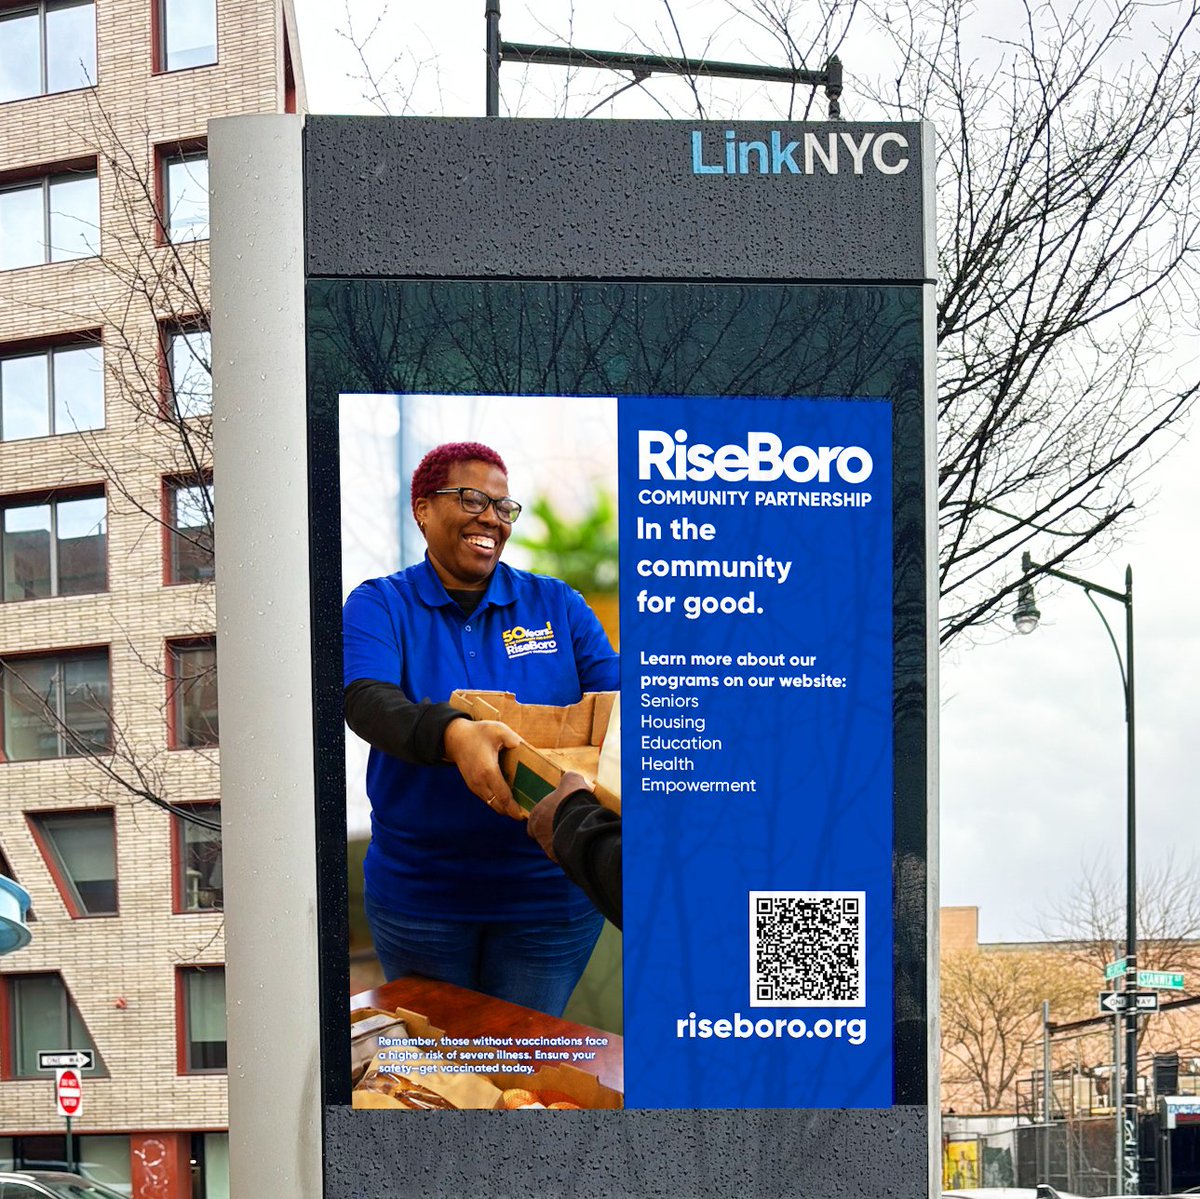 We are proud to be featured on the @FY_EYE PSA Network, NYC's free community media cooperative. Our PSA is now live on nearly 1,800+ digital screens in nonprofit spaces and @LinkNYC kiosks.